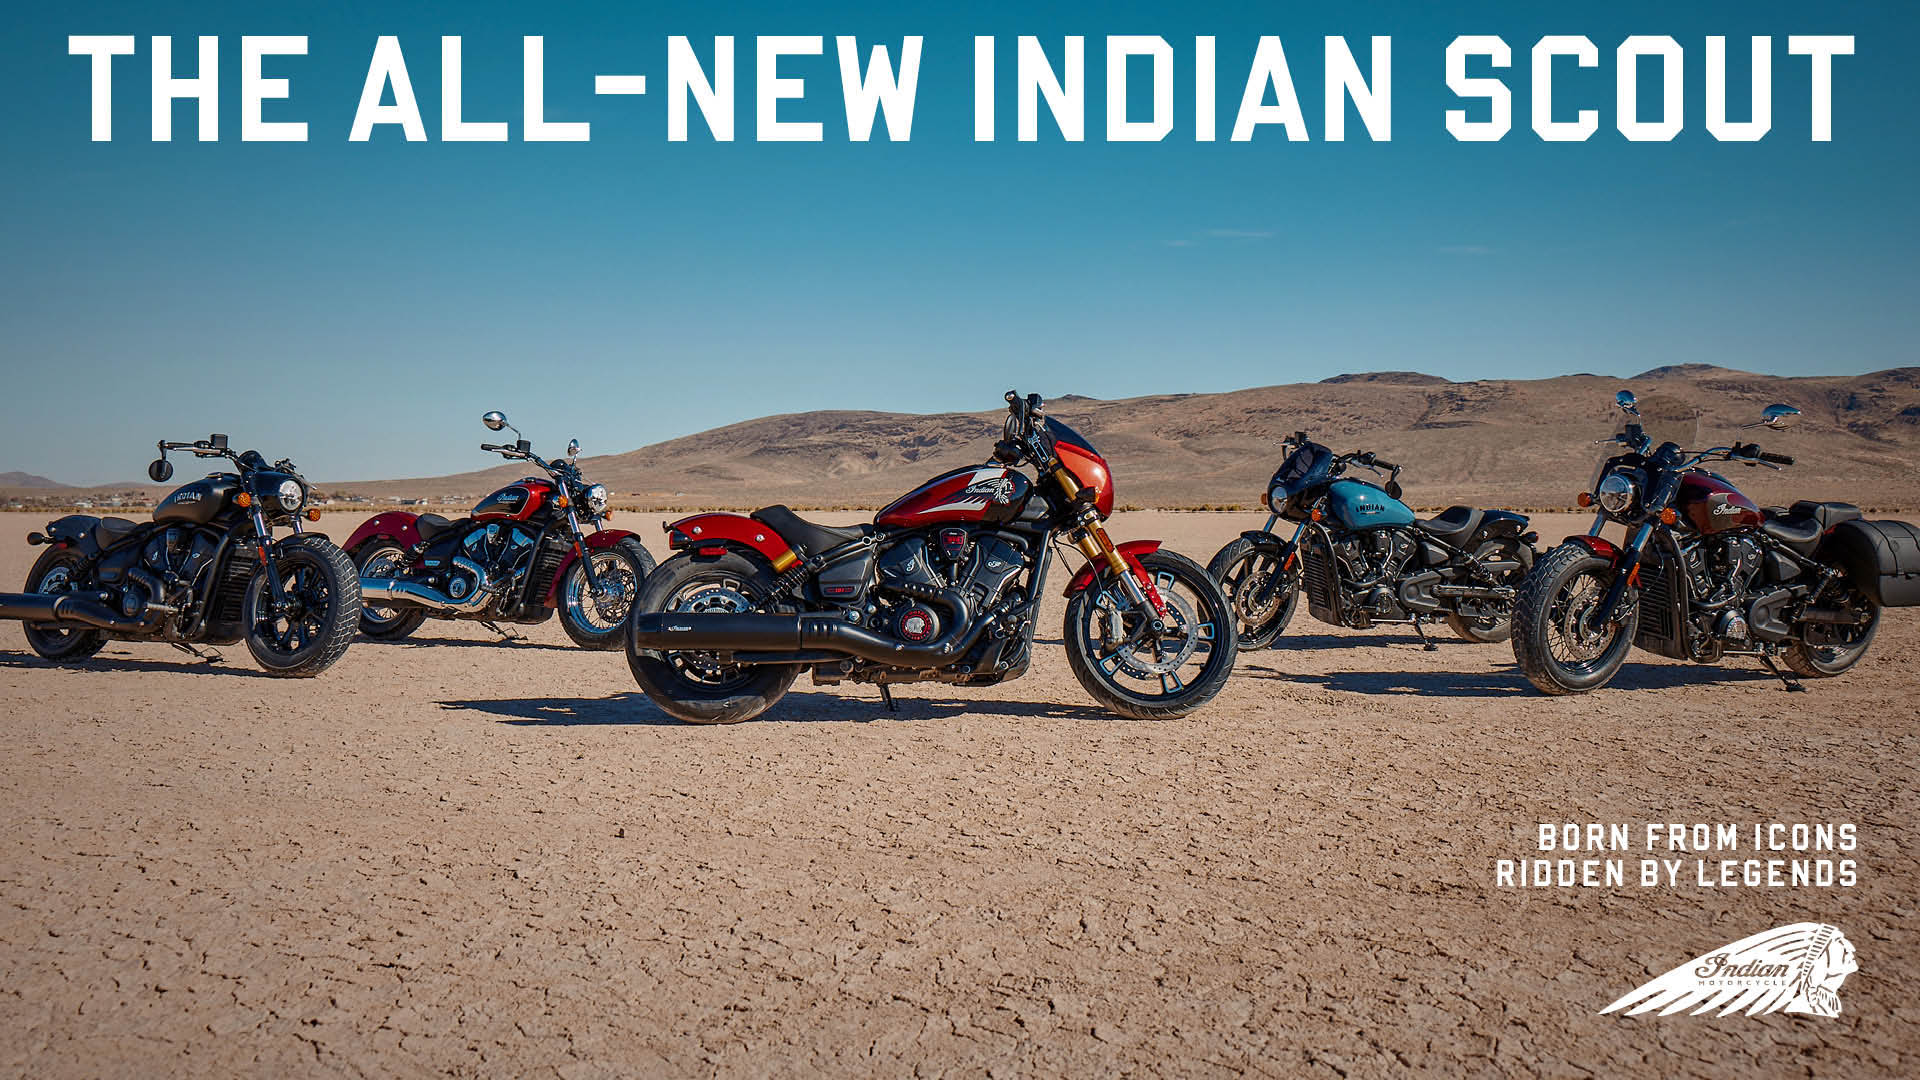 The all-new Indian Scout